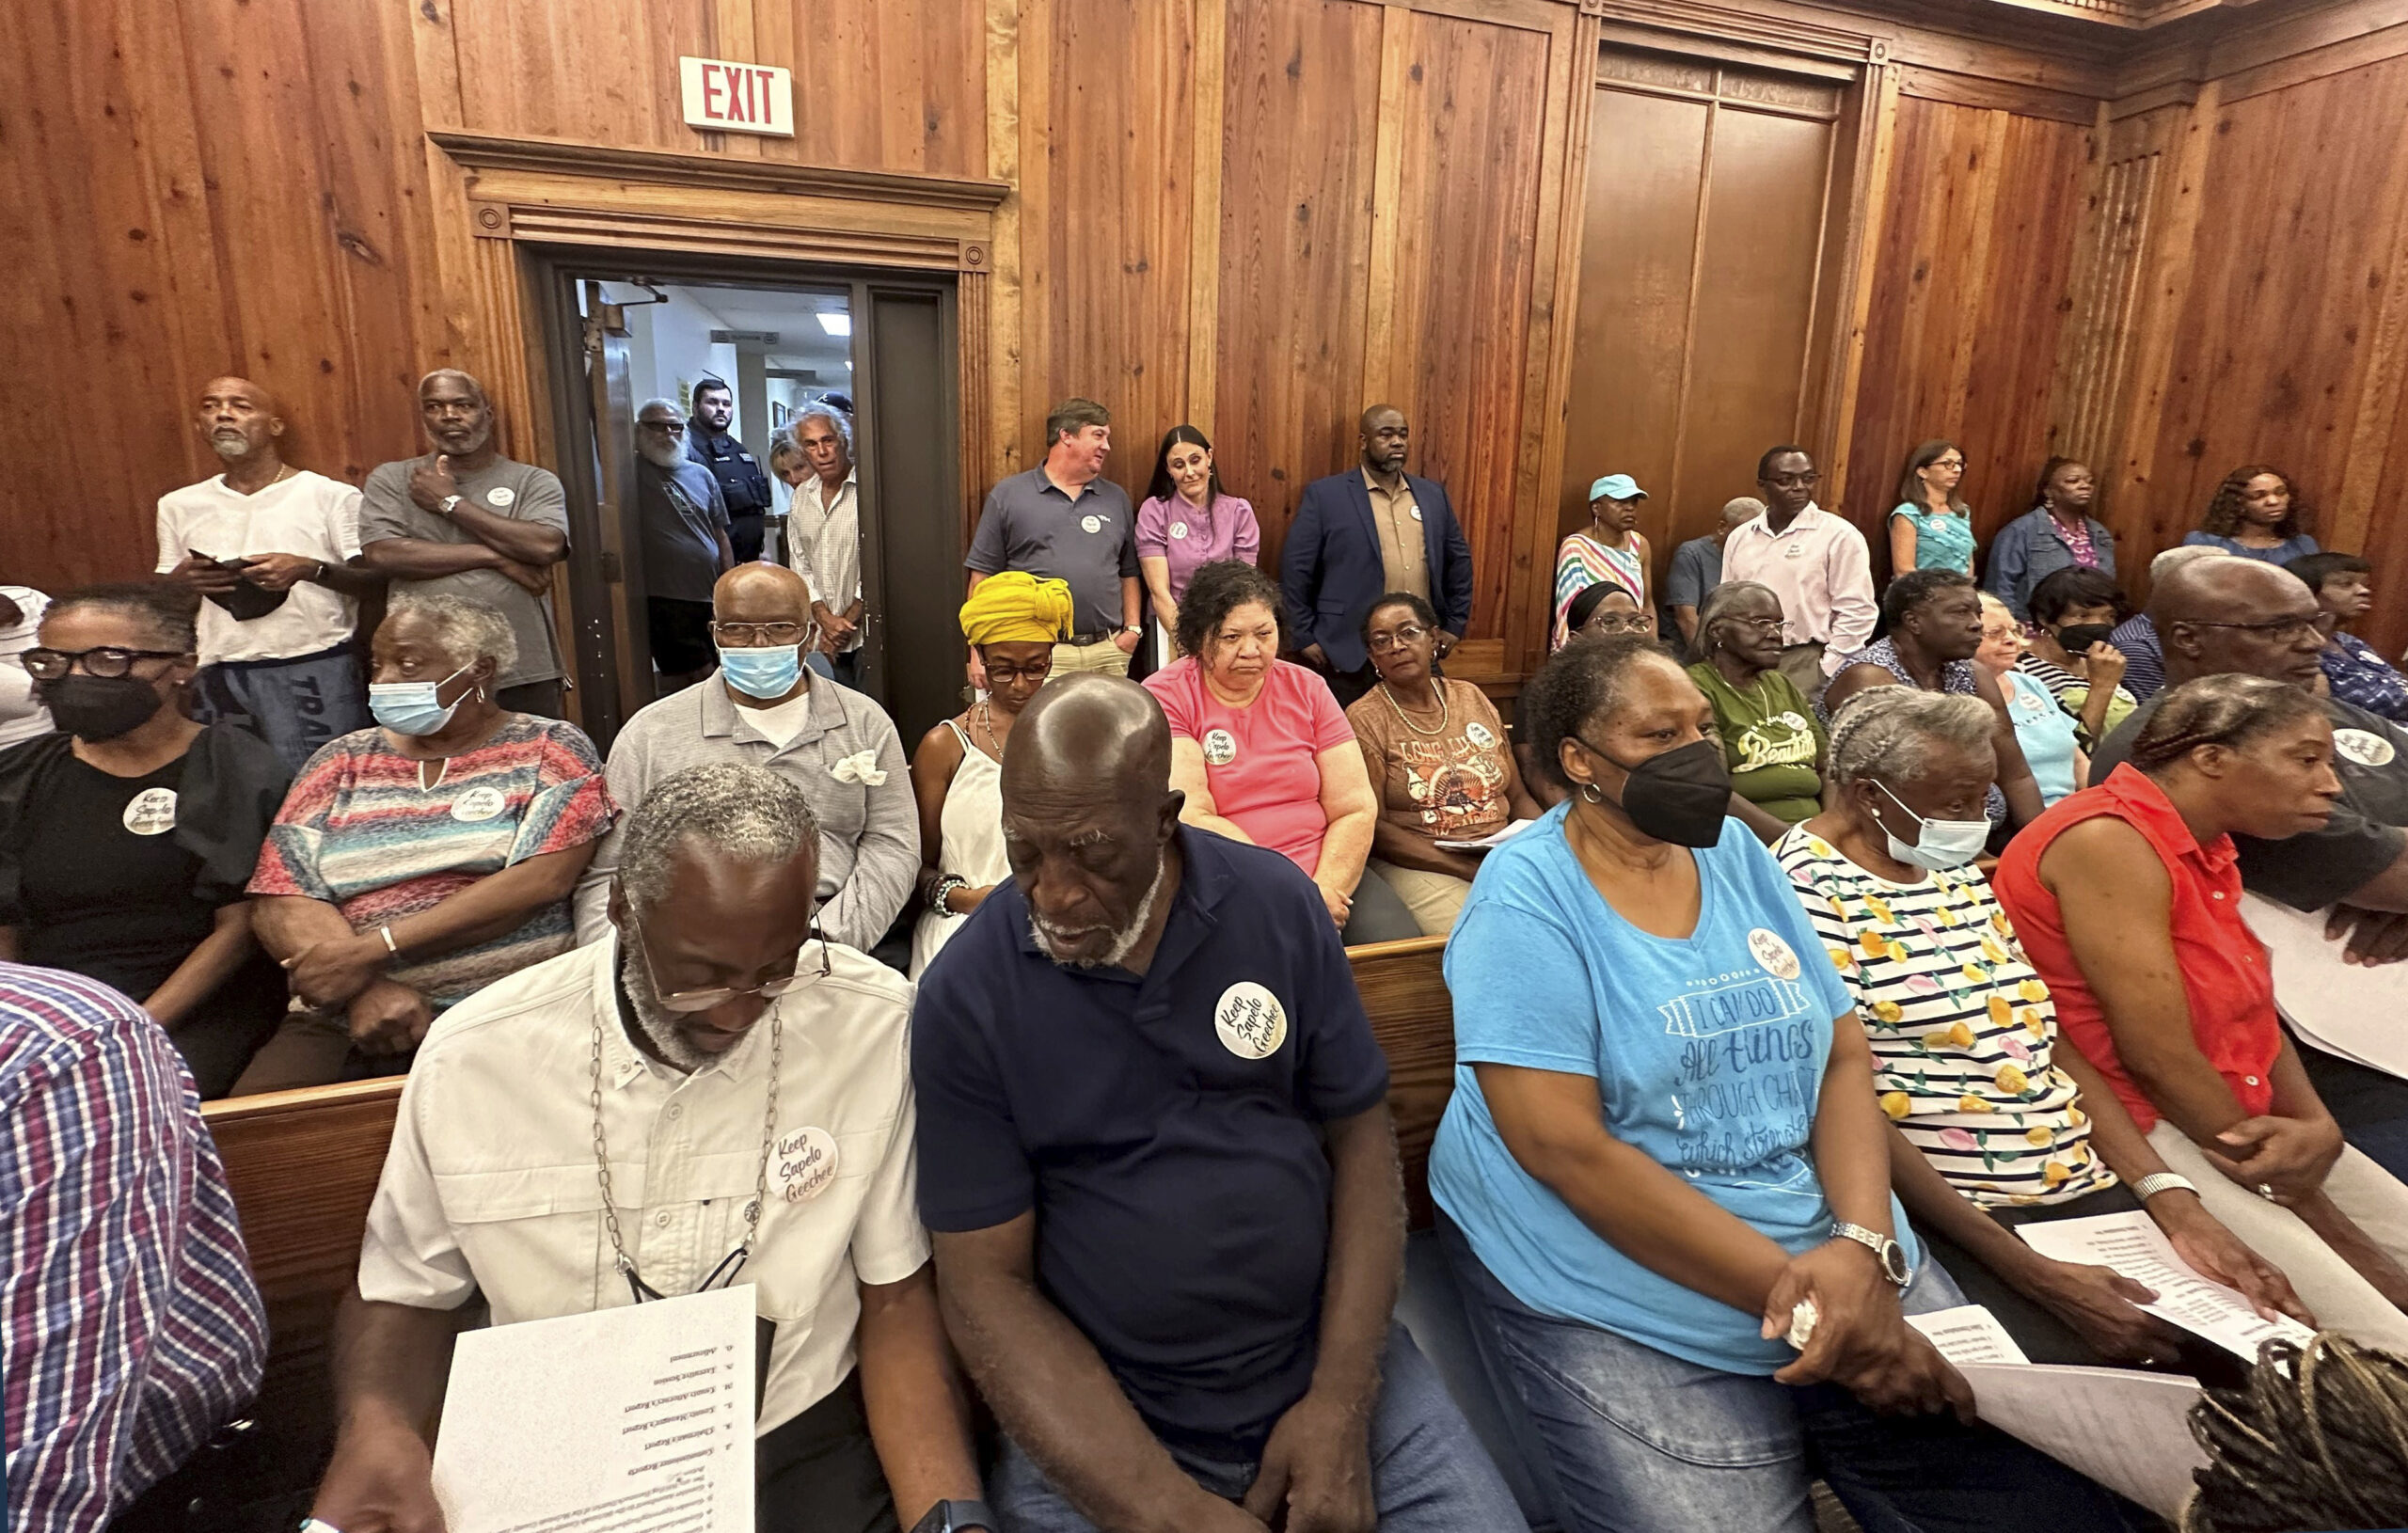 Residents, landowners and supporters of the Hogg Hummock community on Sapelo Island fill a courtroom in Darien, Georgia, on Tuesday, Sept. 12, 2023, as McIntosh County commissioners meet to approve zoning changes that some fear will endanger the Gullah enclave founded by formerly enslaved people. Commissioners voted to double the size of homes allowed in the tiny community, raising concerns that rising property values and tax increases will force out the indigenous population. Photo credit: Russ Bynum, The Associated Press